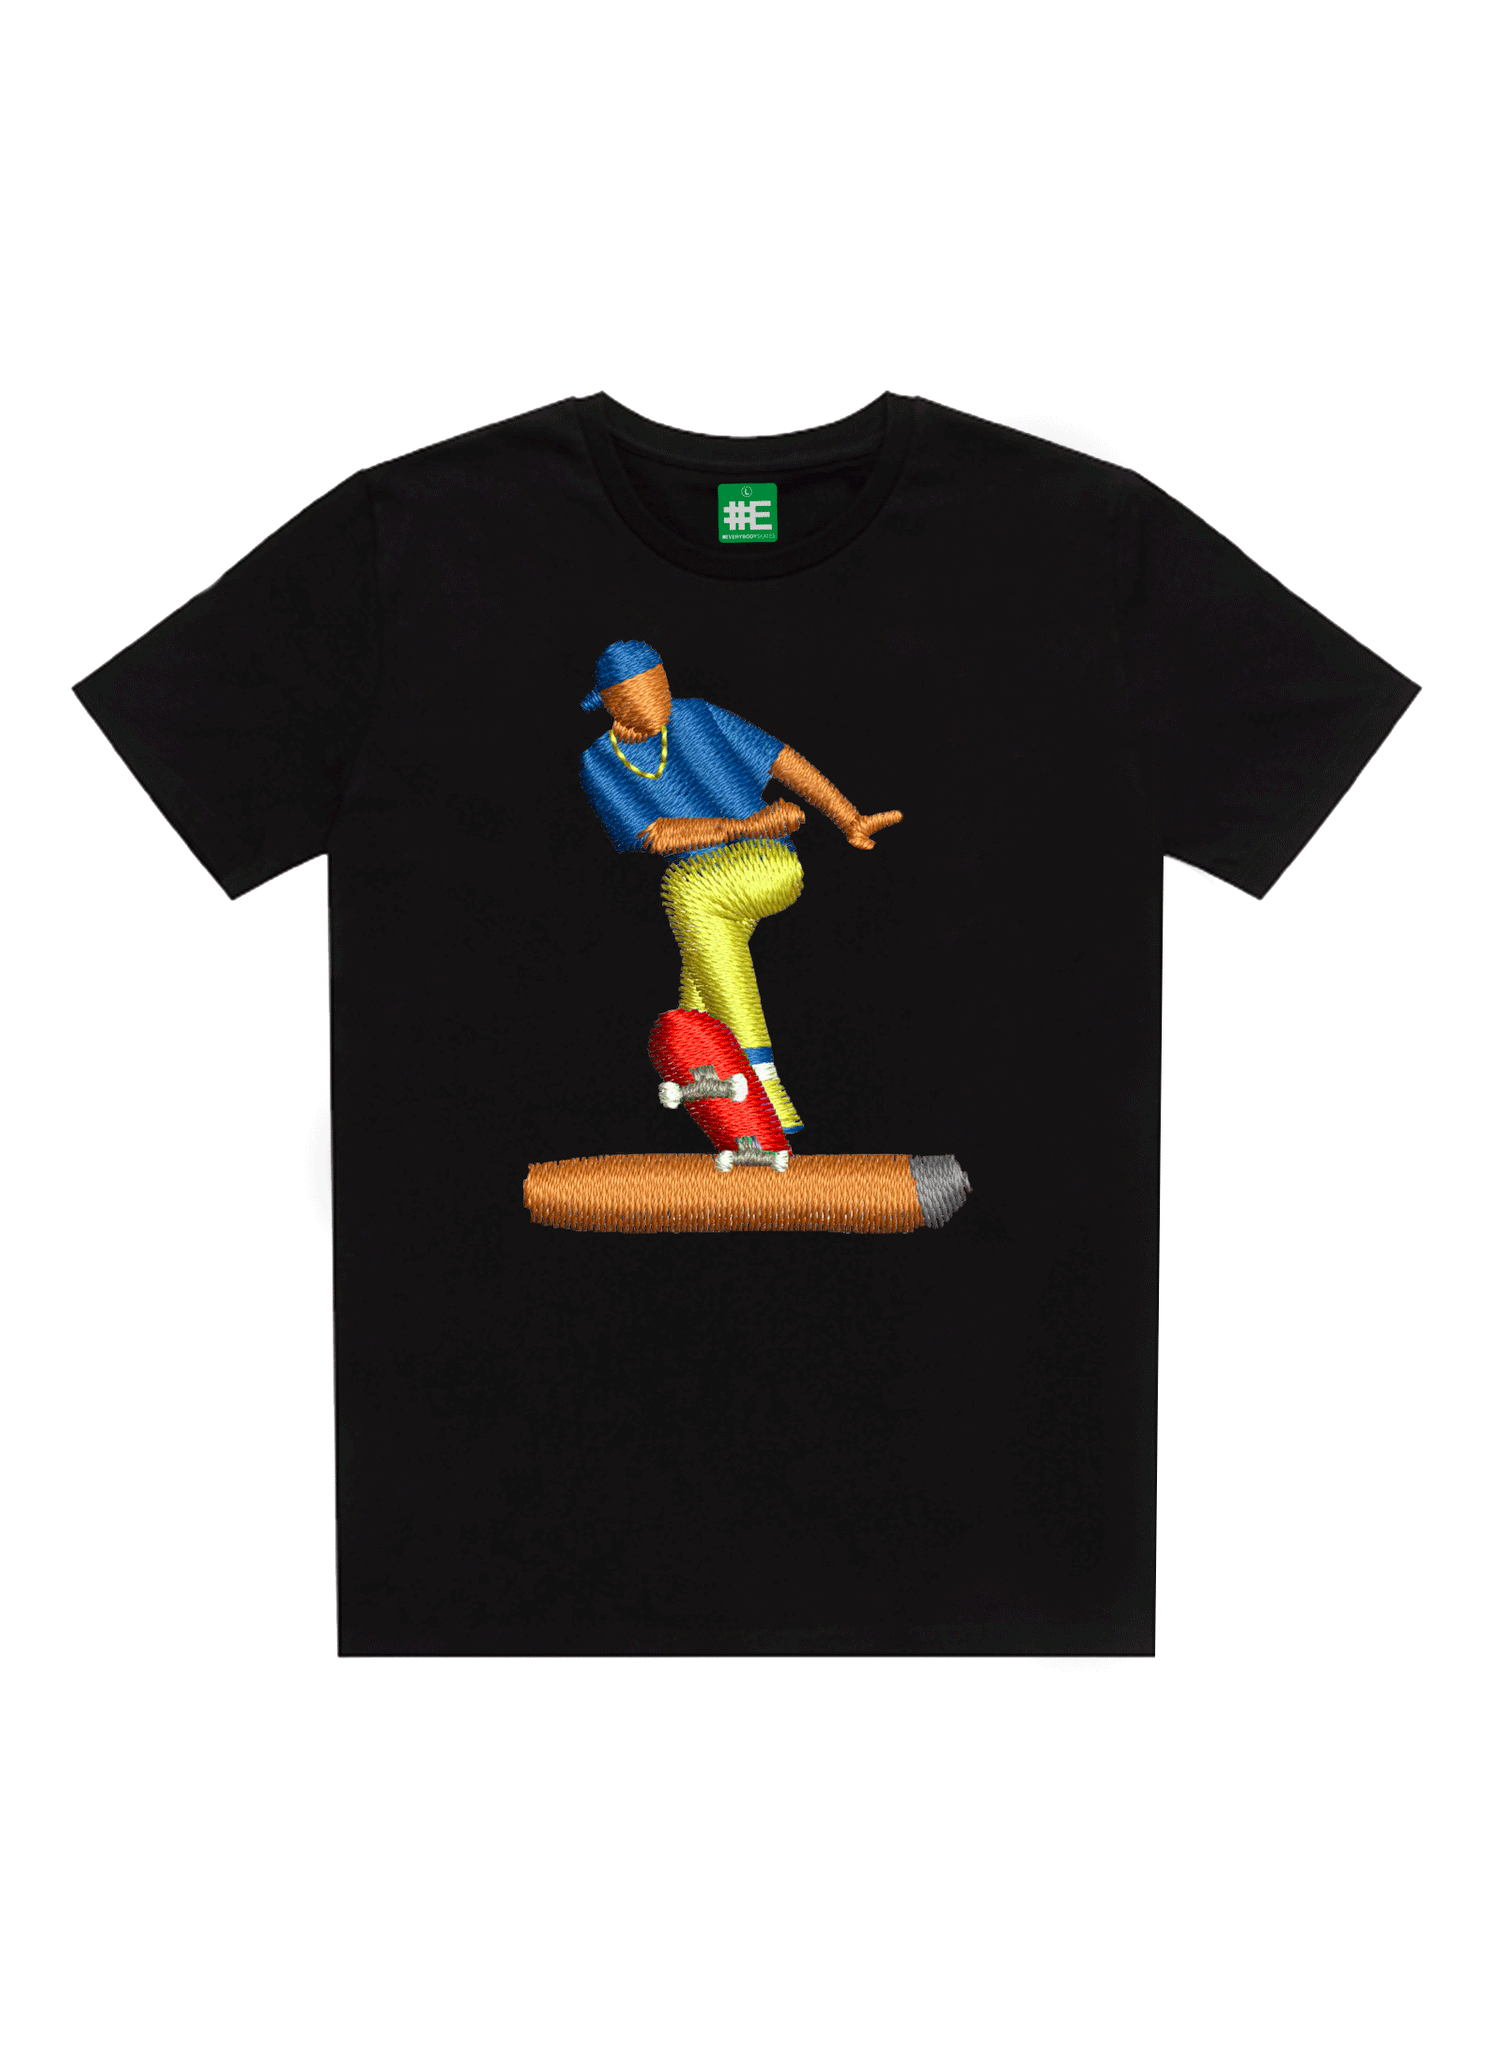 Bluntslide Embroidered Graphic Tee